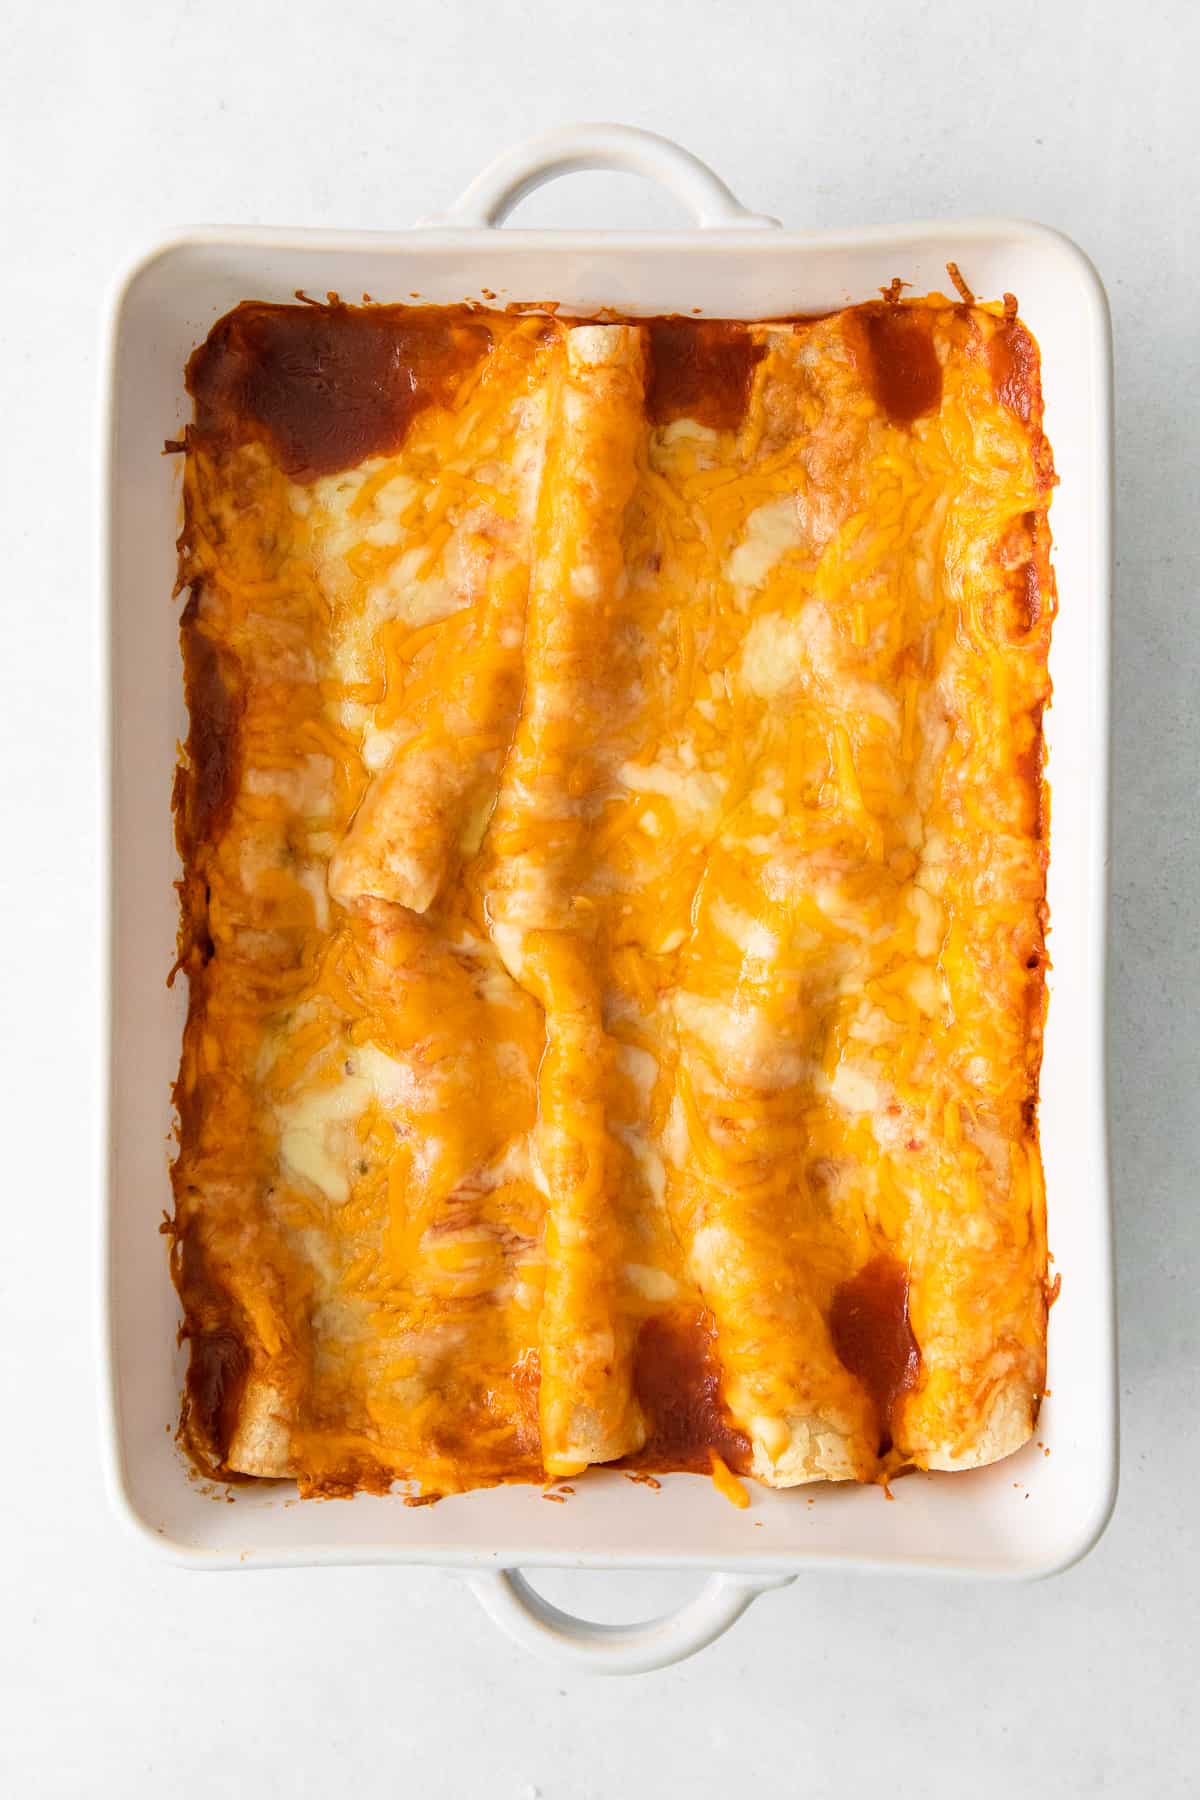 Cheese enchiladas baked in a casserole dish.